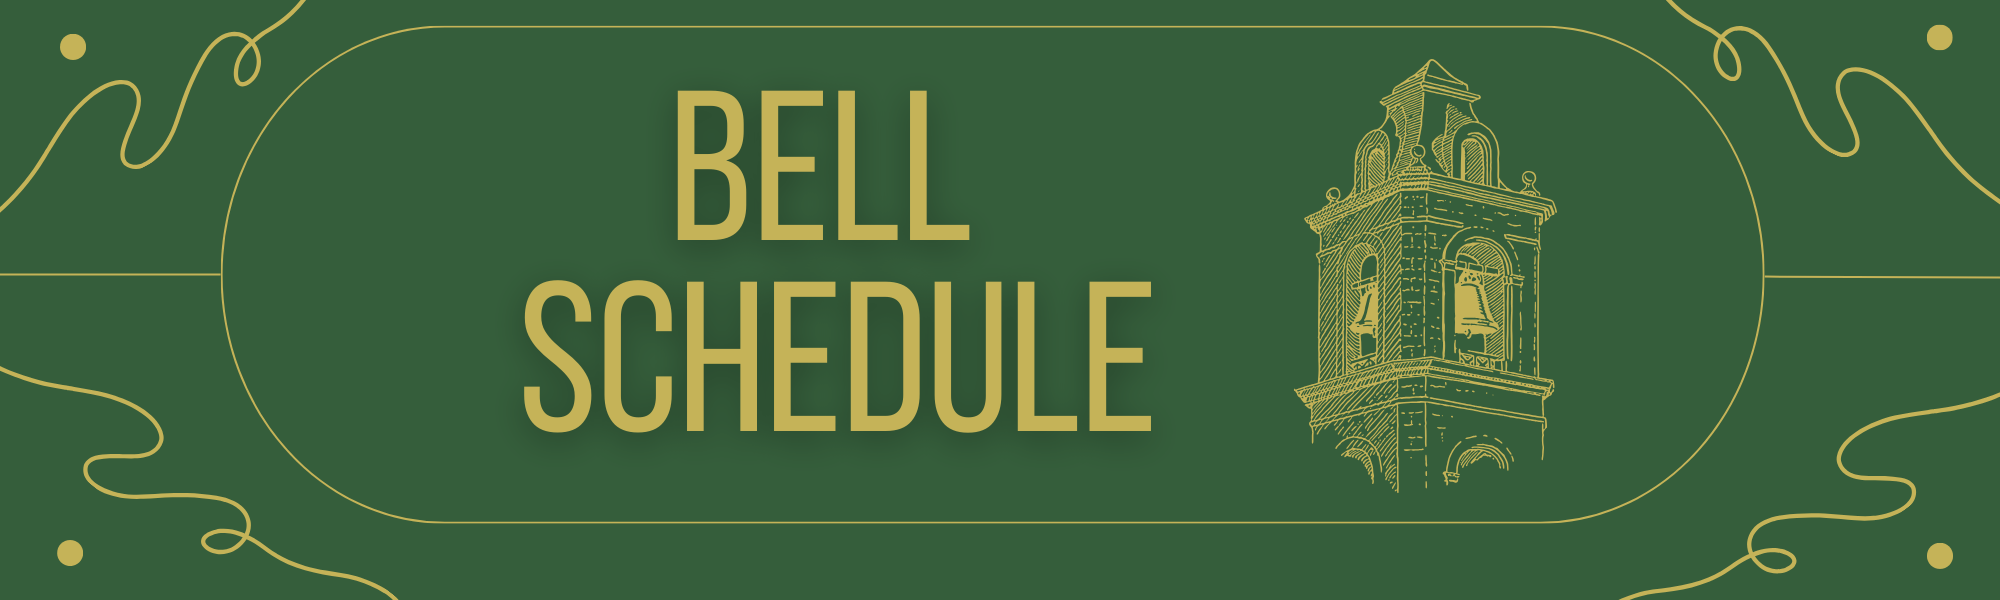 Bell tower, bell schedule, green background, golden detailing and  framing